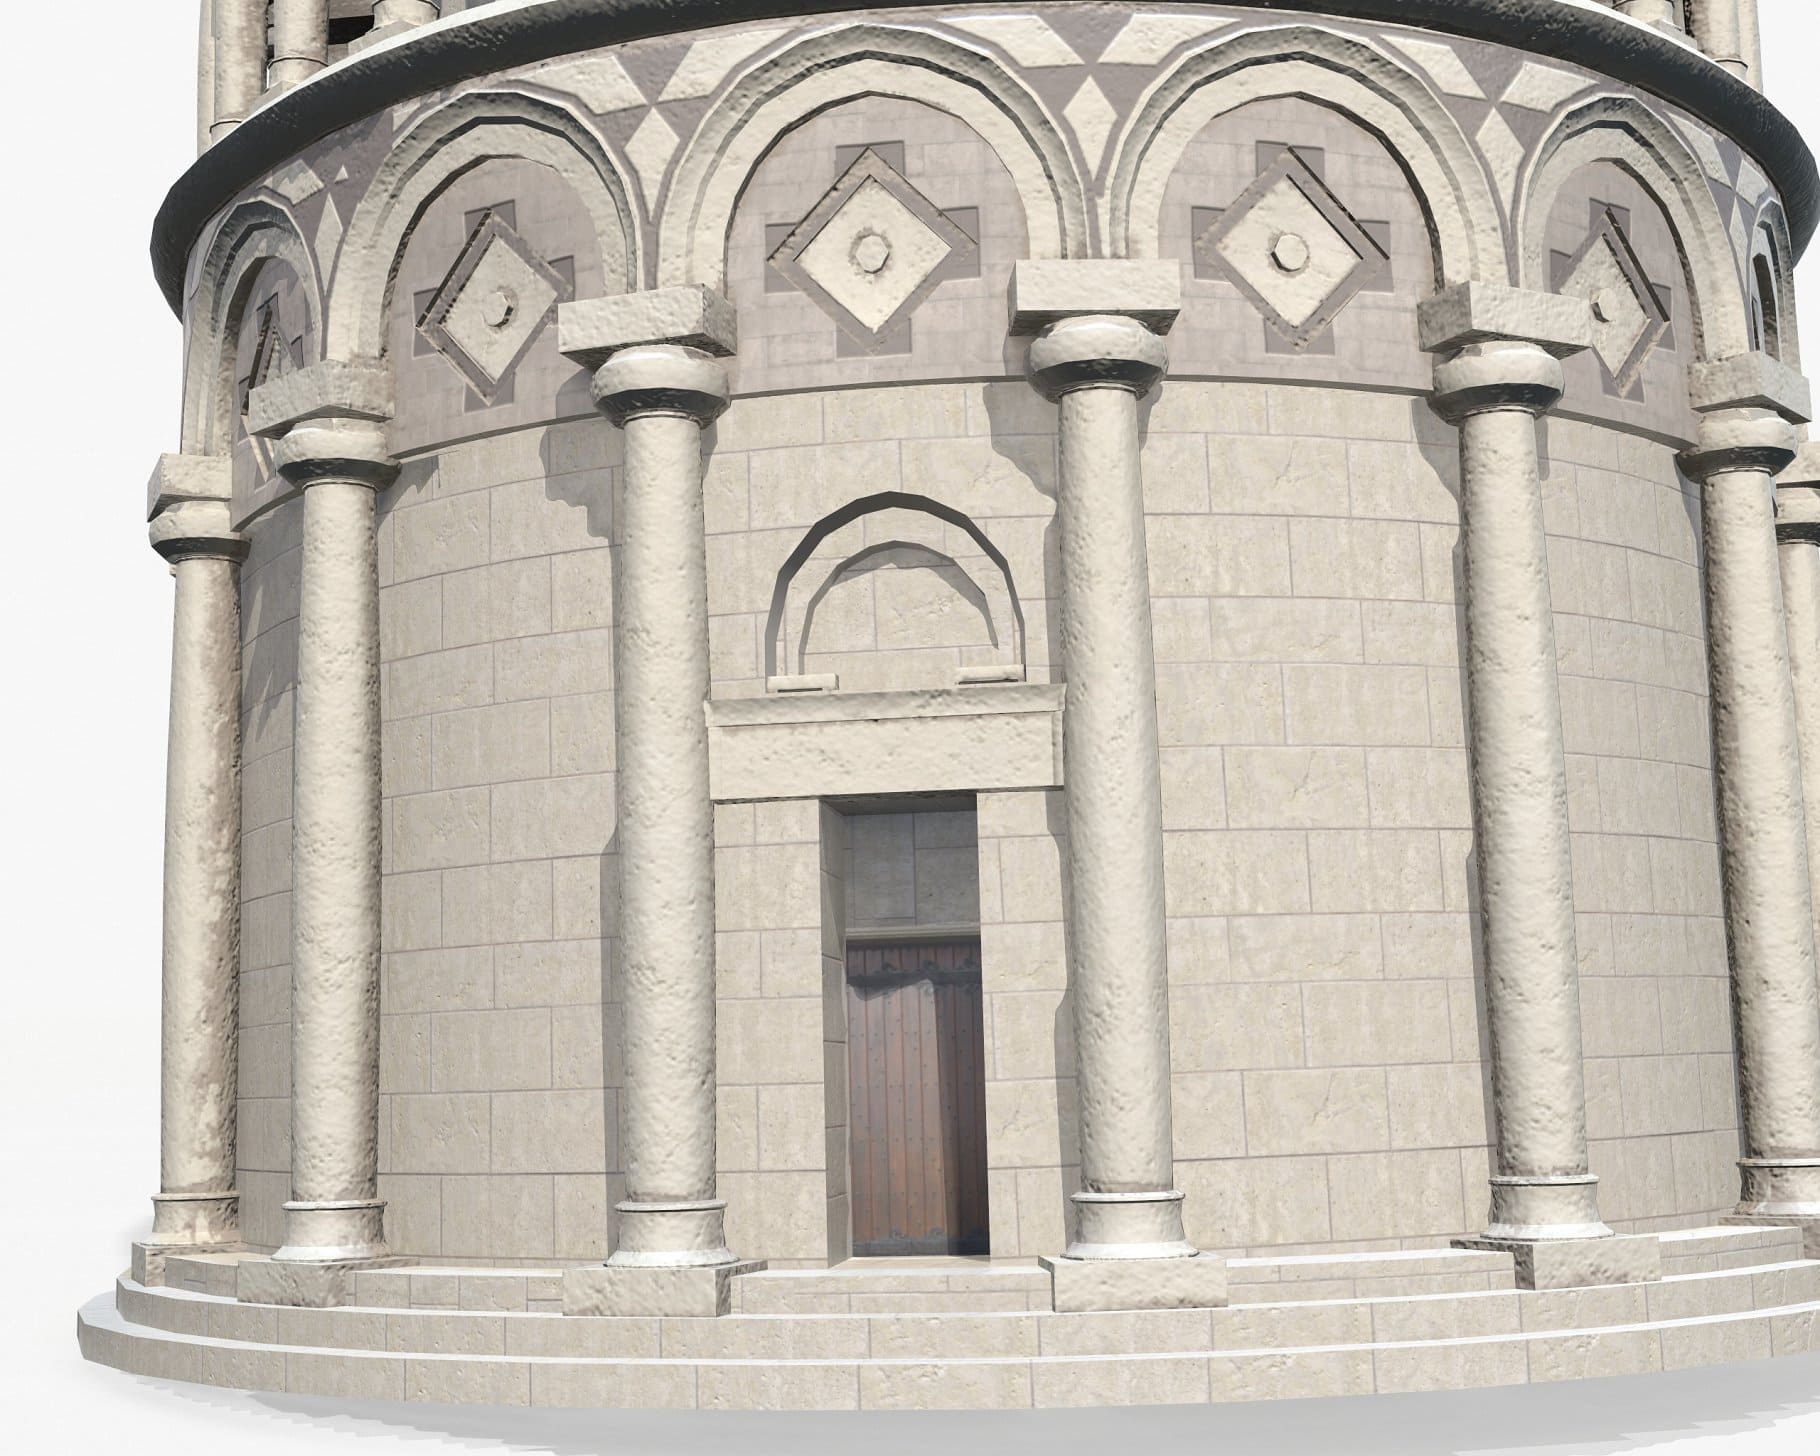 The entrance to the Leaning Tower between the columns is shown on the 3D model.